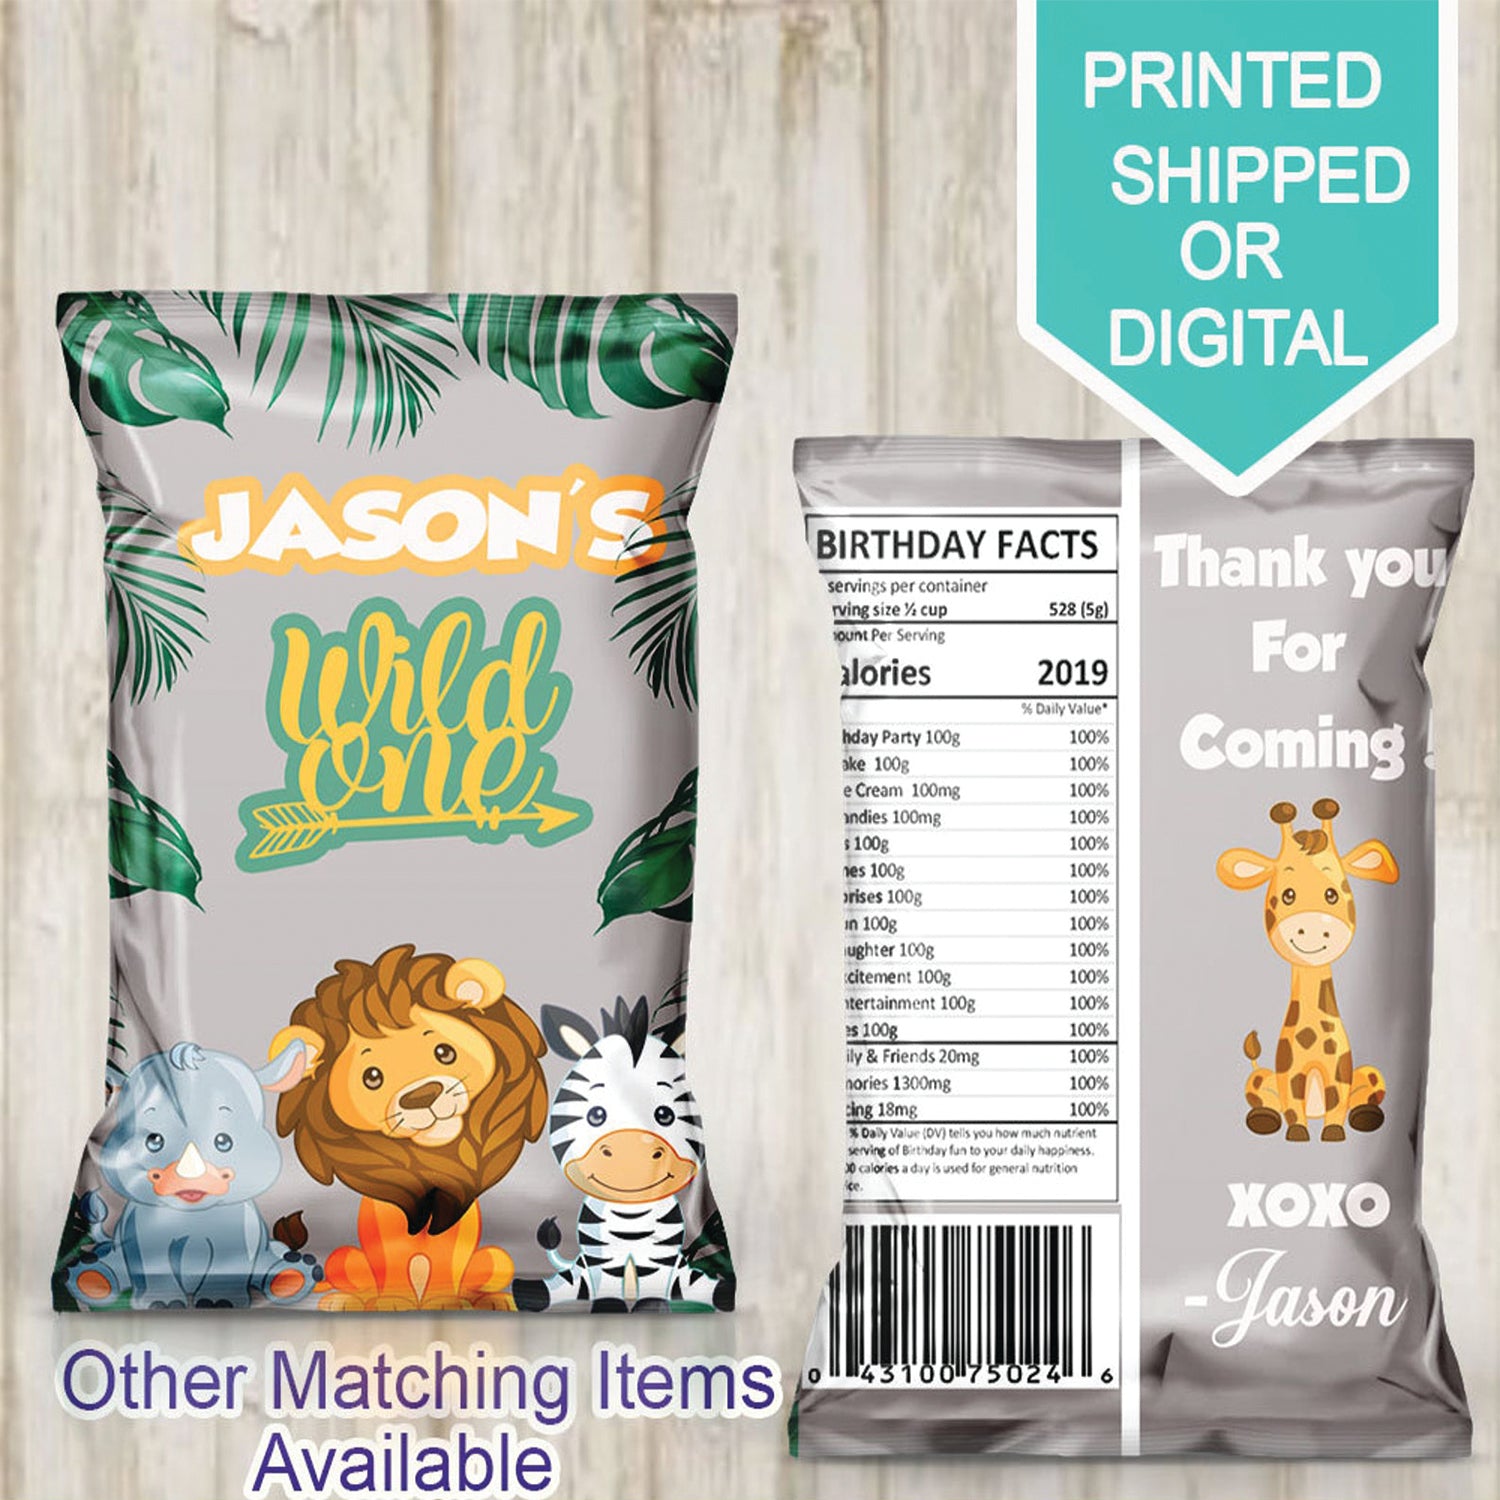 Two wild birthday party chip bags/wrappers-jungle party favors-safari –  Personalize Our Party